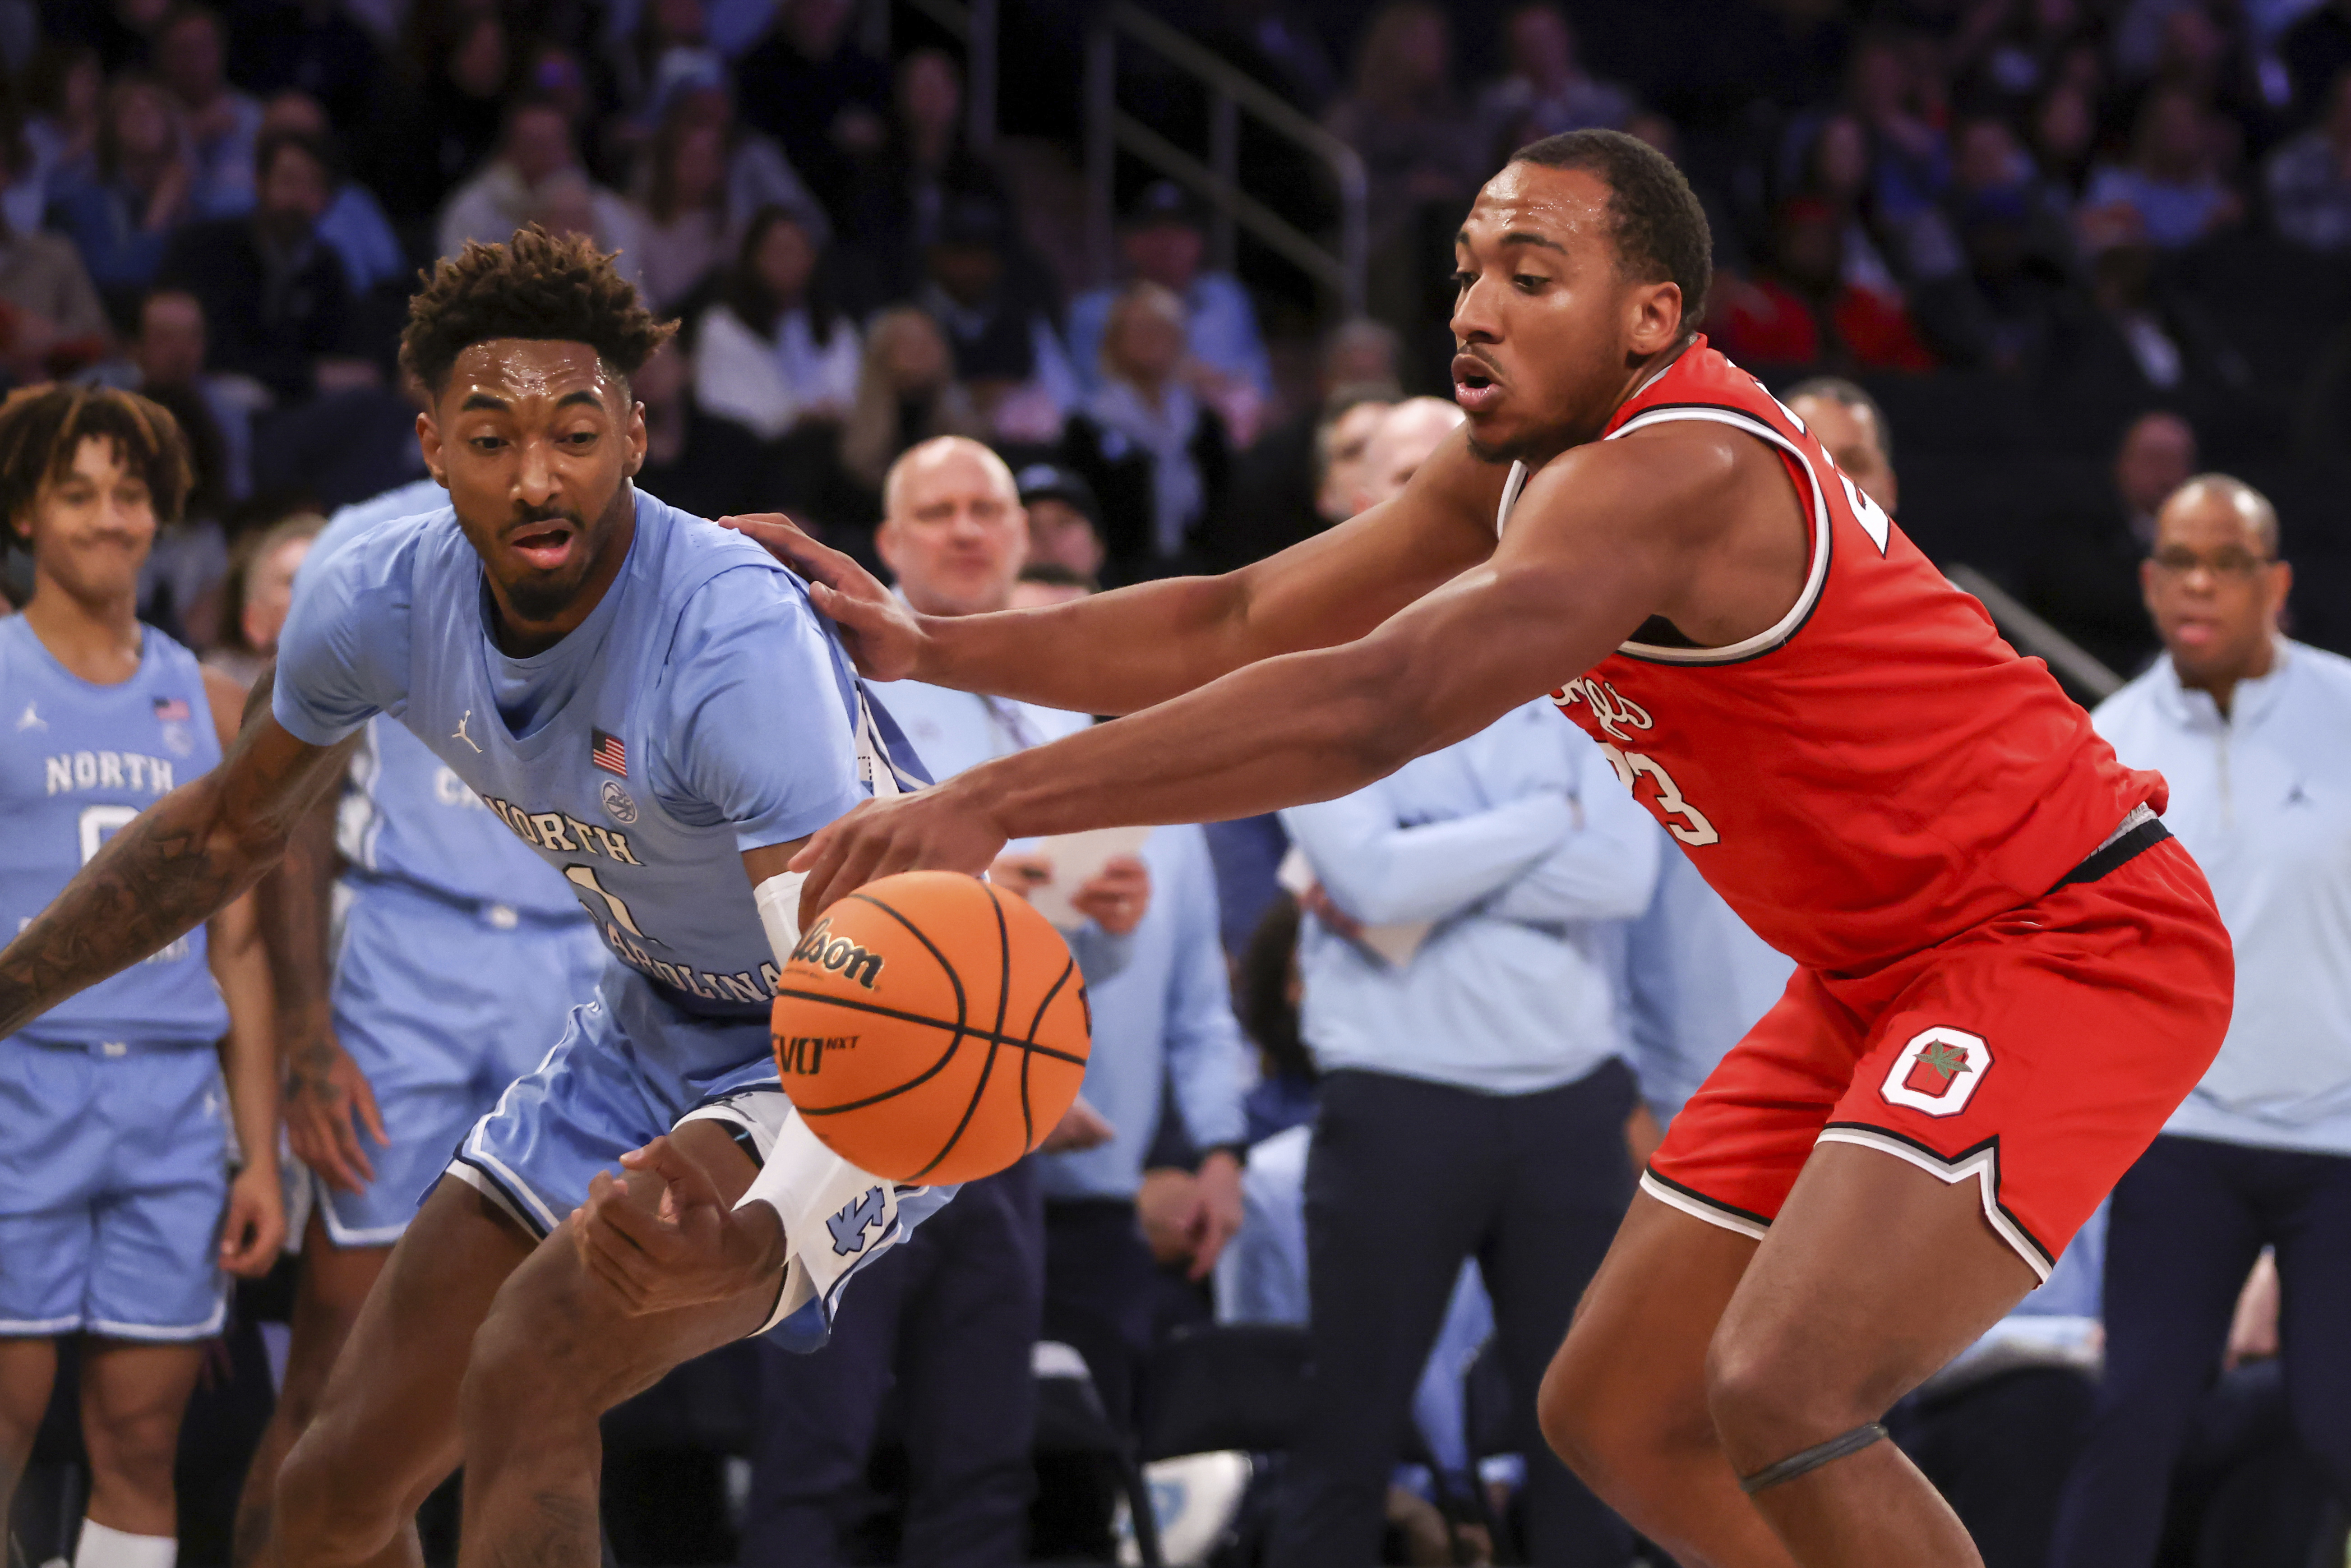 Ohio State basketball falls in overtime, 89-84, to North Carolina in CBS Sports Classic